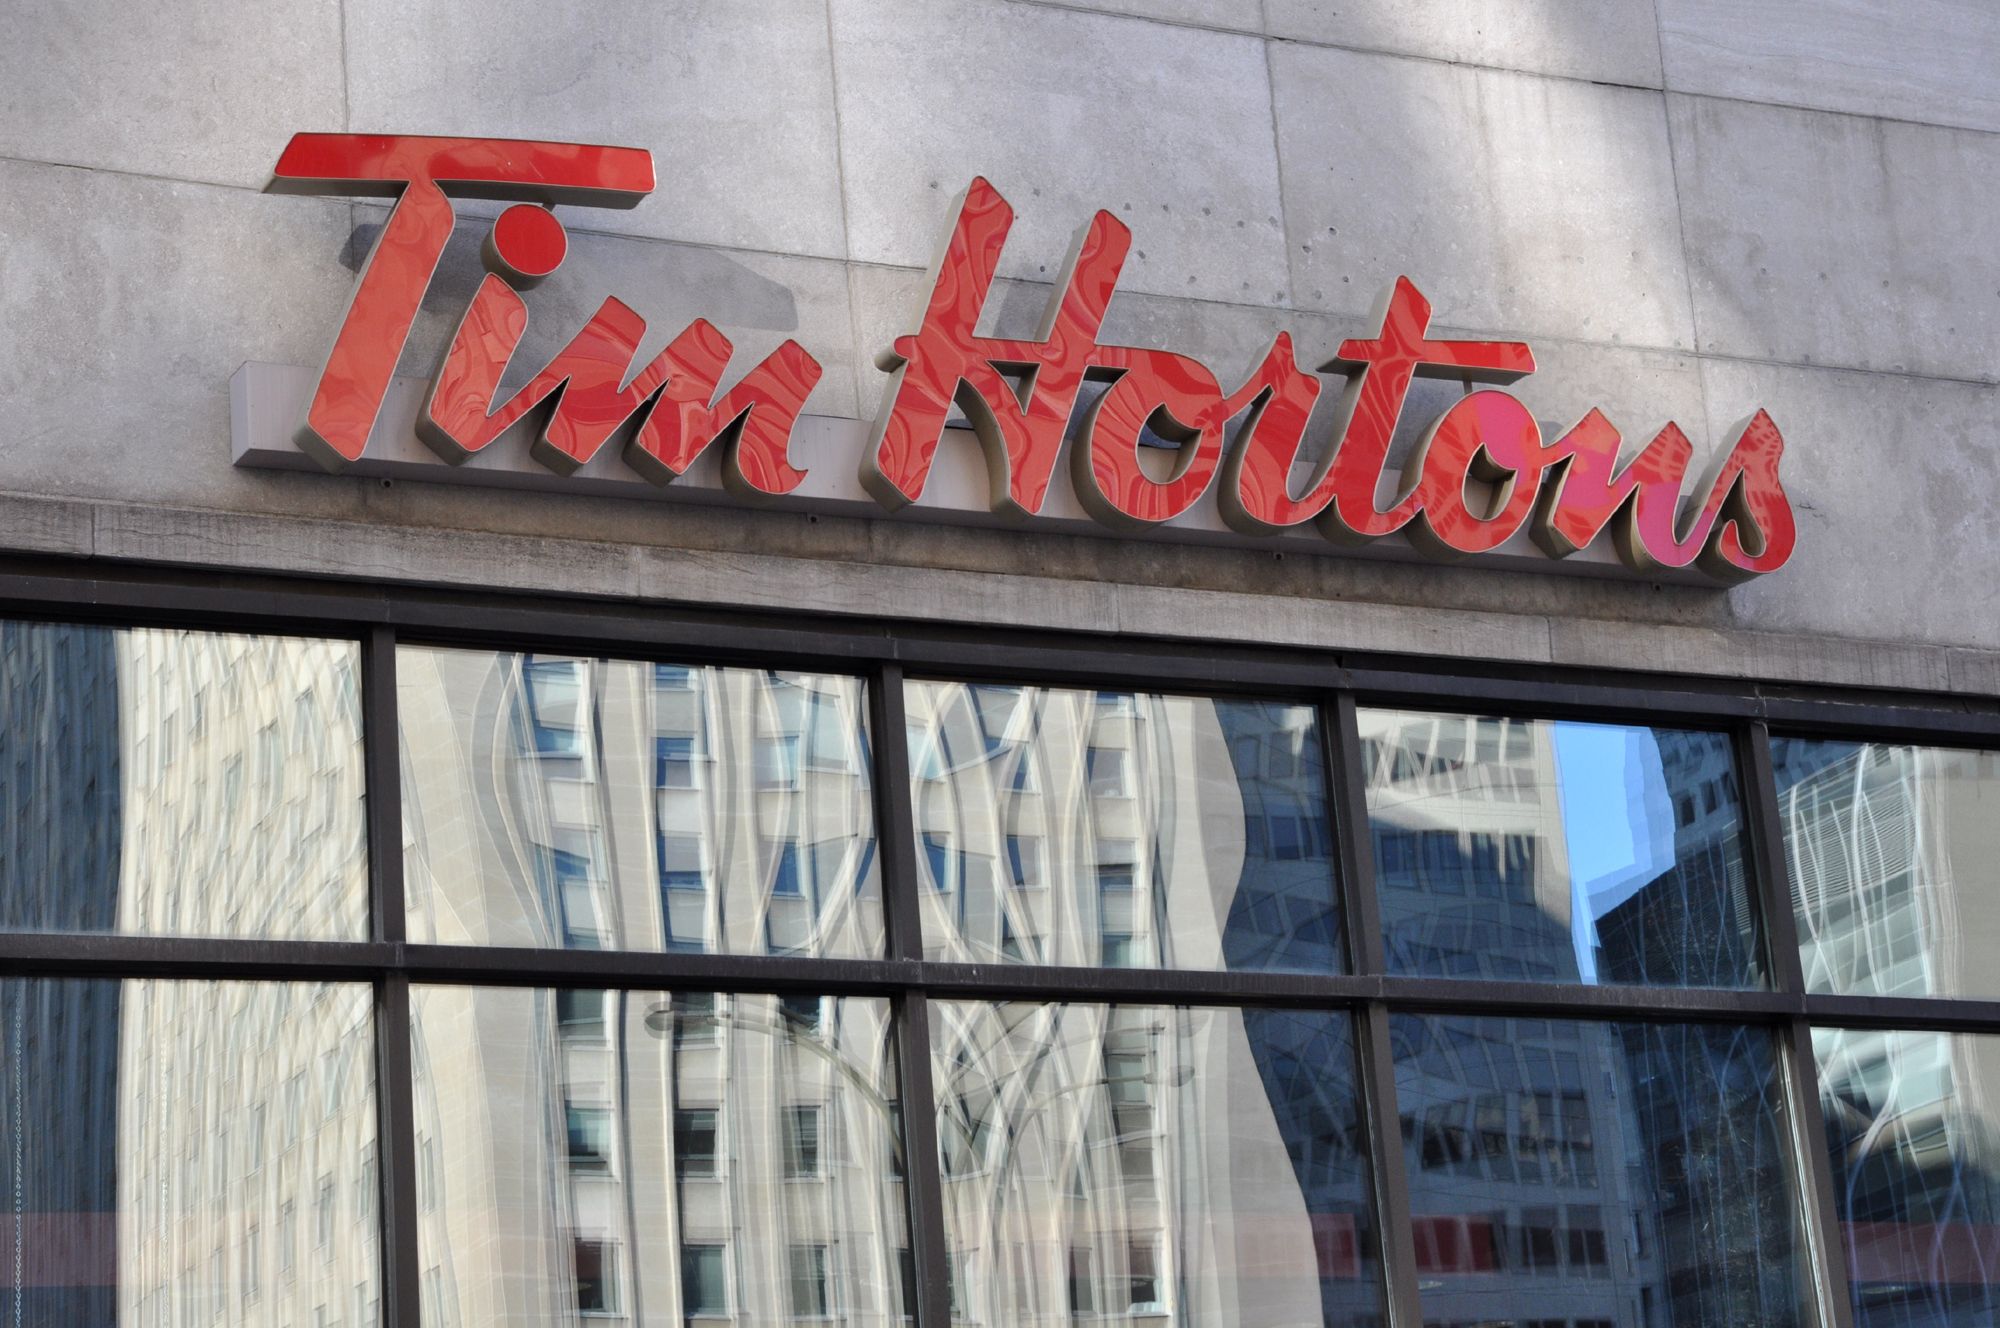 Tim Hortons on LinkedIn: Have you been practicing your Workplace Donut  Etiquette?